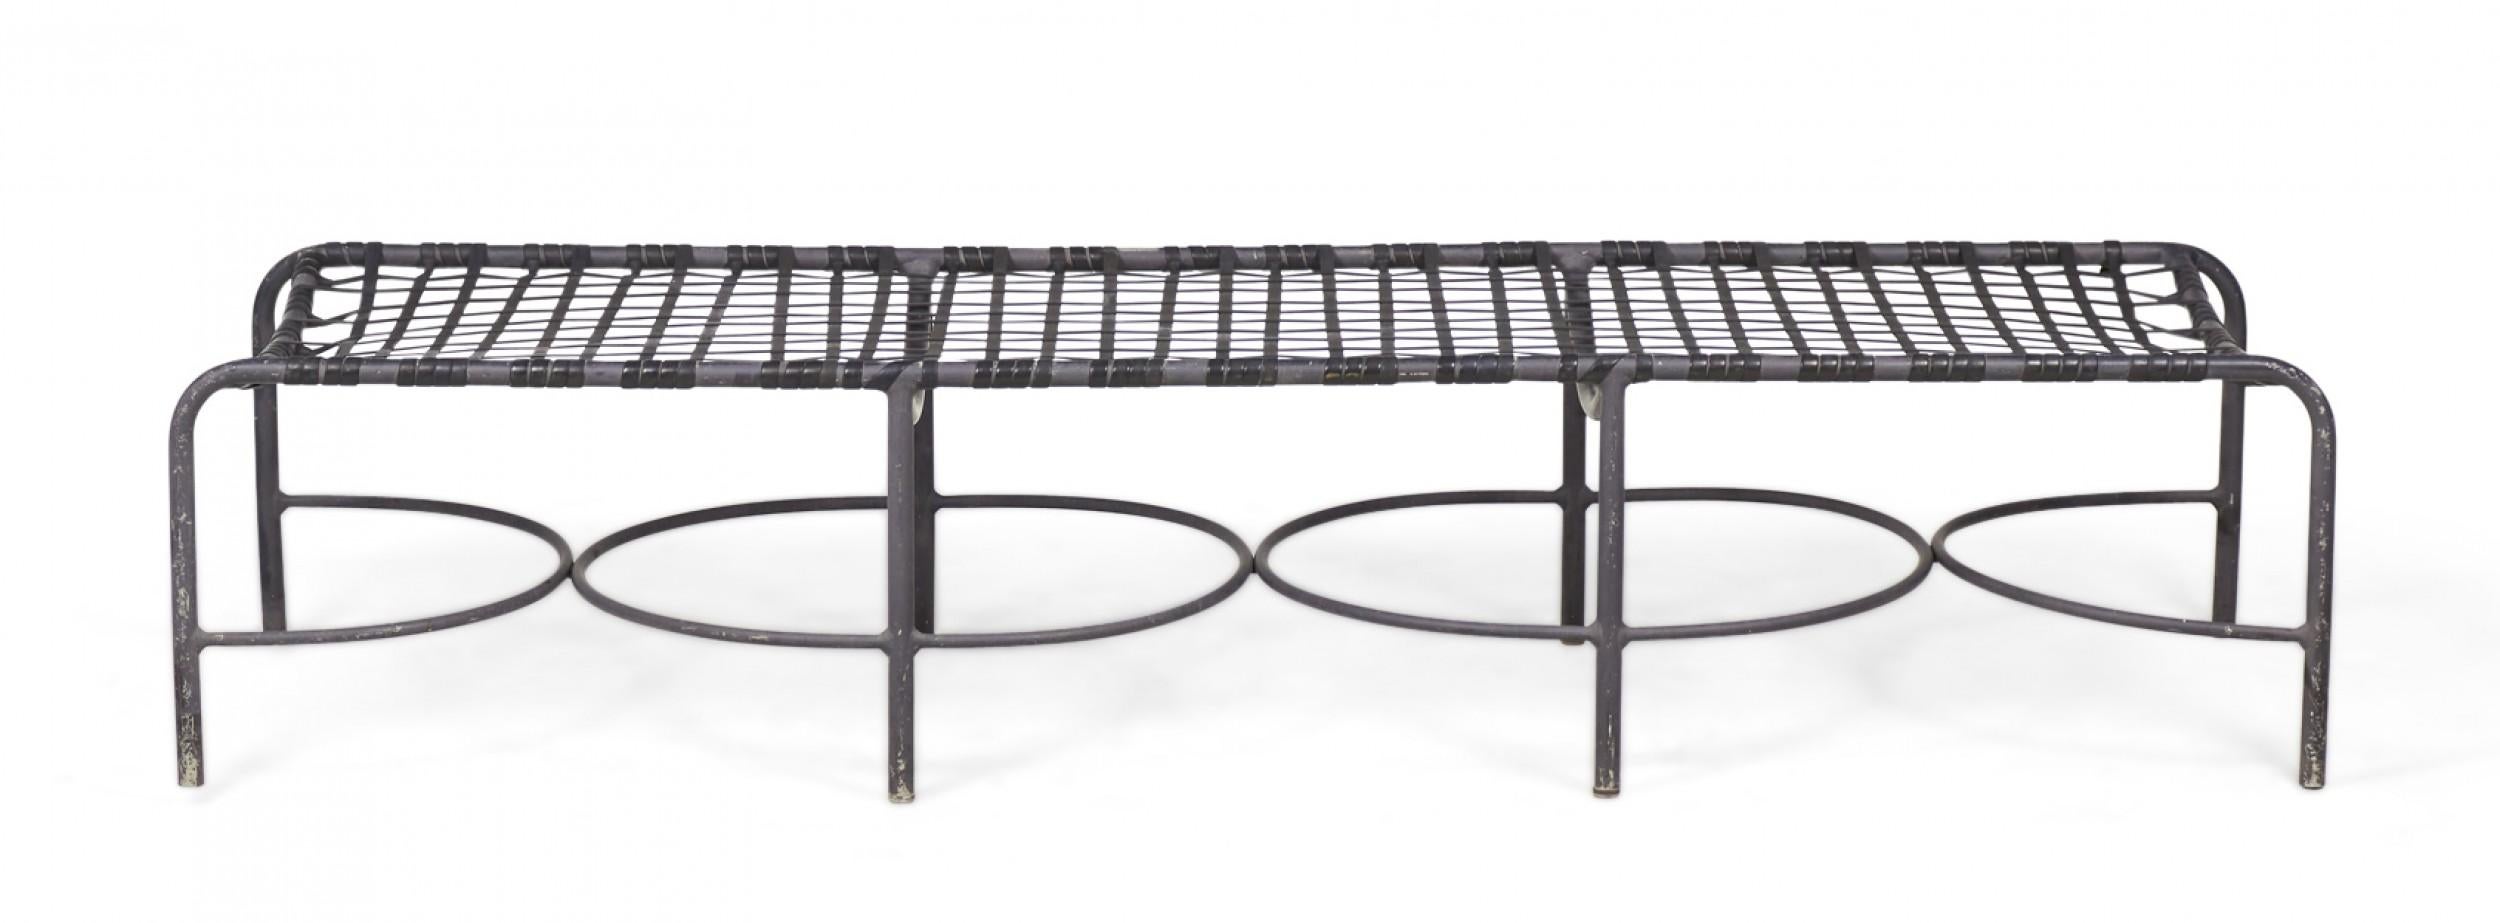 American mid-century outdoor aluminum sun bench / chaise with a latticed aluminum seat resting on eight legs with circular and semicircular stretchers between. (BROWN JORDAN)